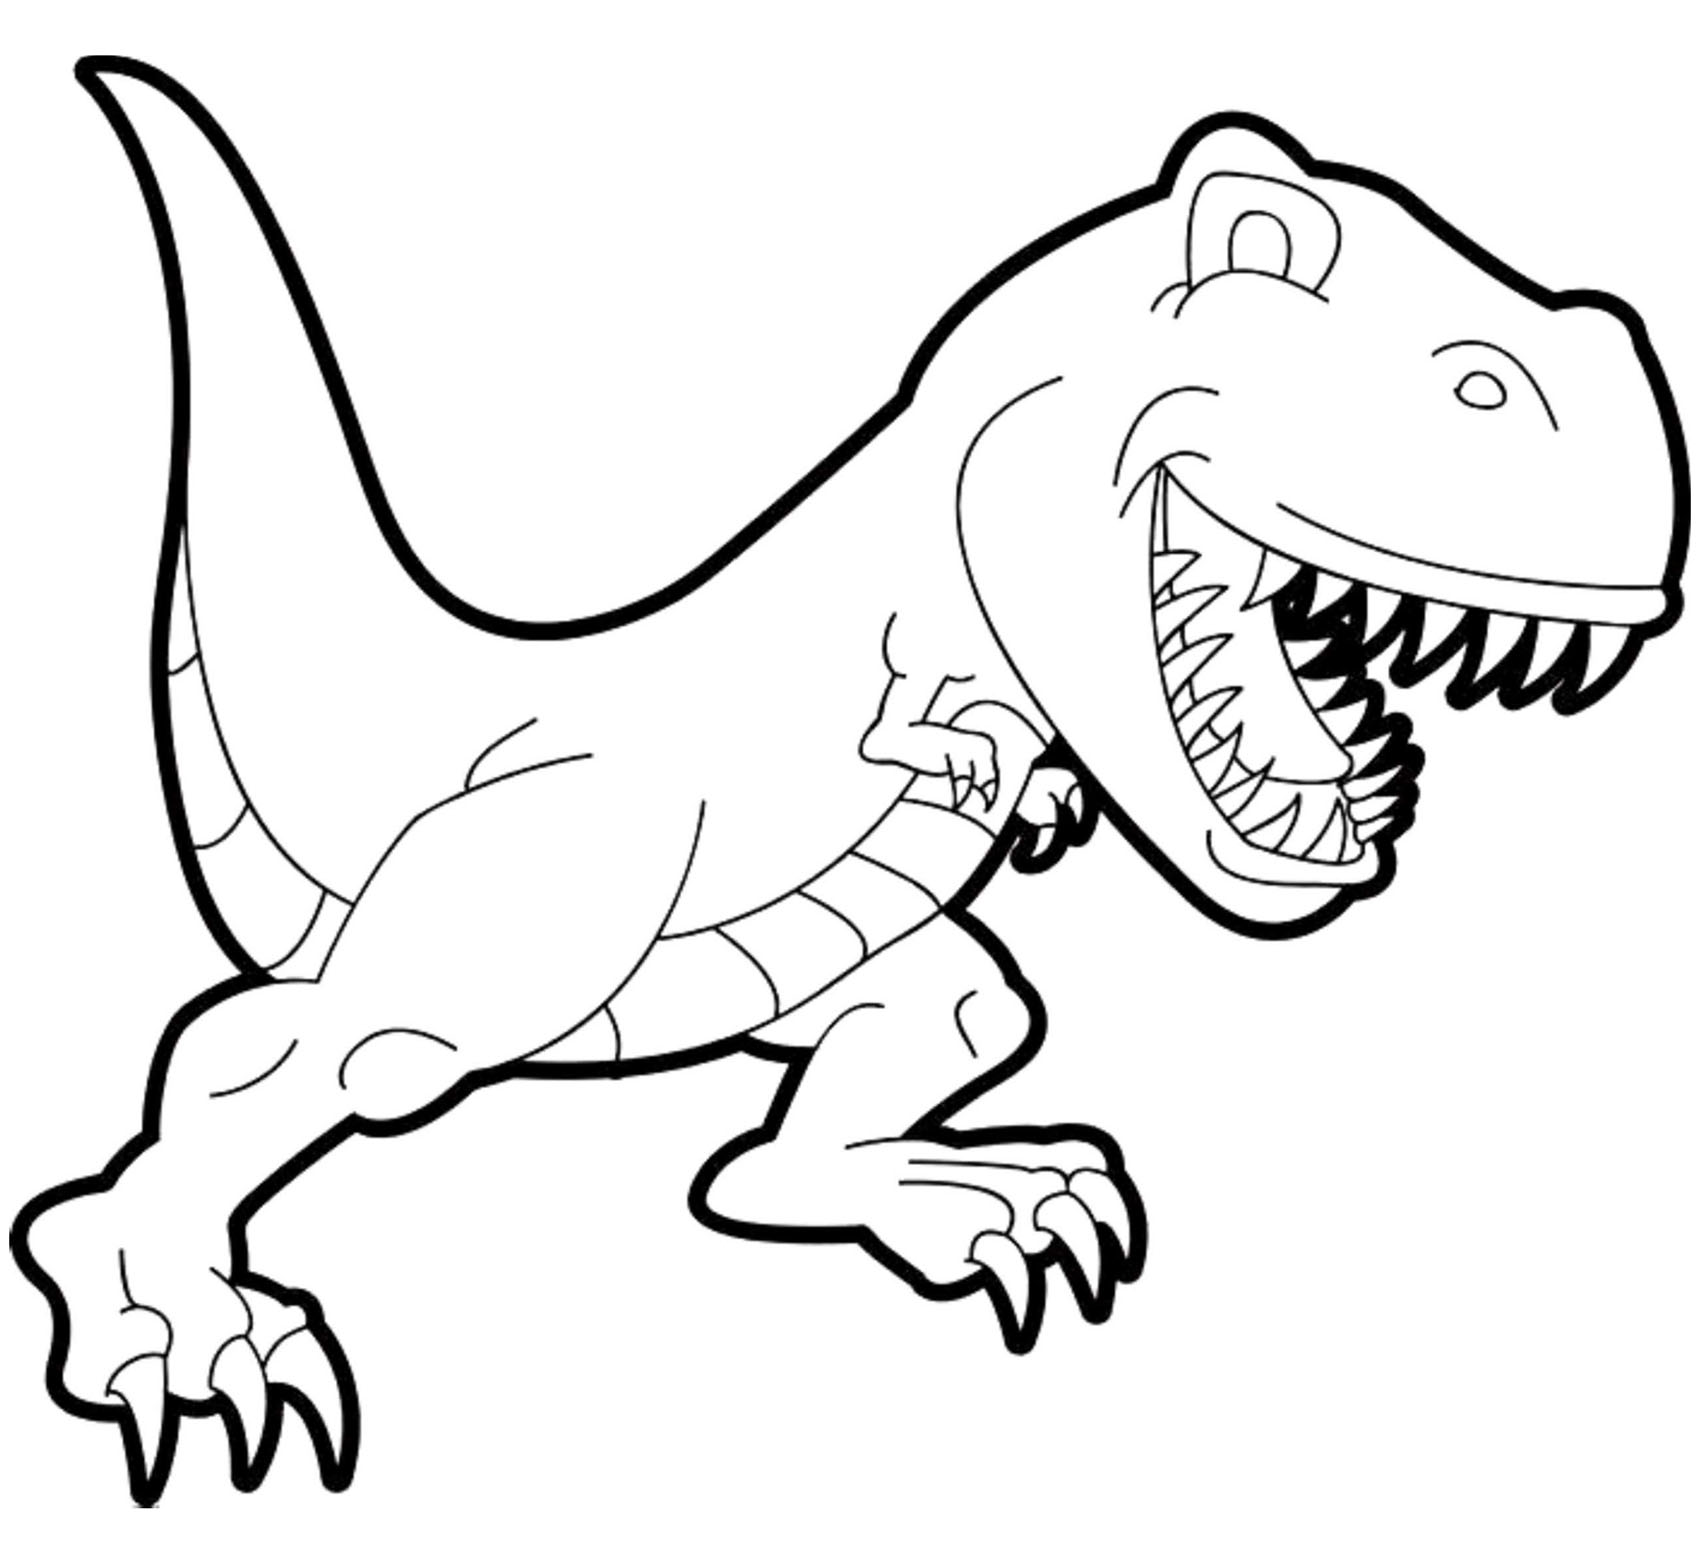 Download Dinosaurs free to color for kids : Tyrannosaur Rex Cartoon ...